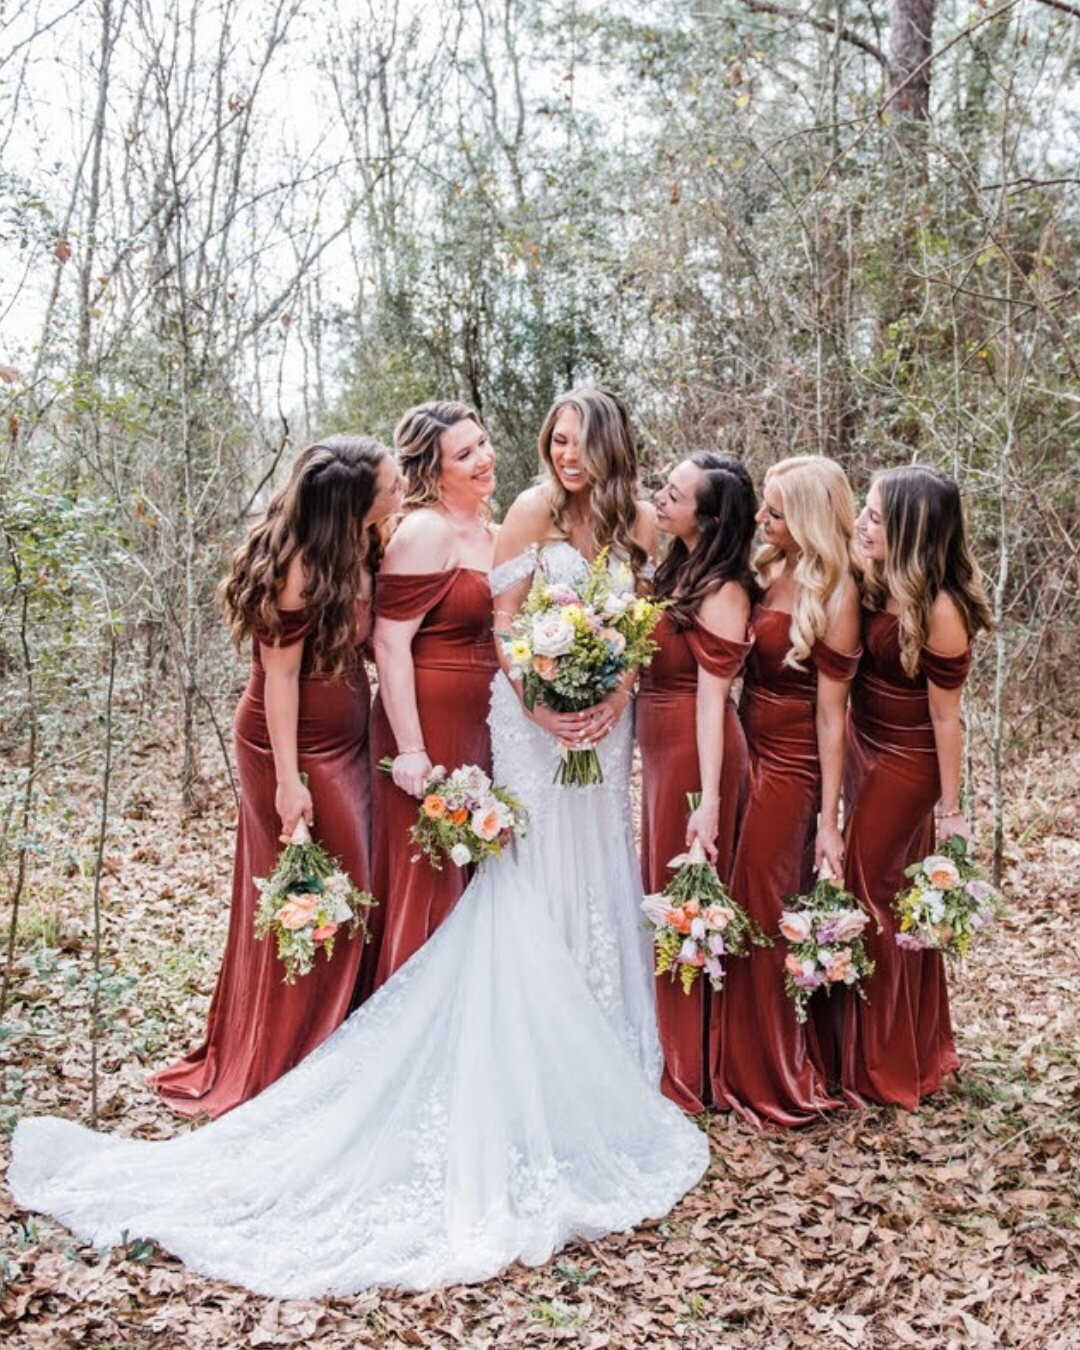 Surround yourself with a bridal party who brings out the best in you 💞

📷 @studiohtown 
💄 @bpartistry_ 
 💐 @heb_magnolia_blooms 

More vendors from this beautiful wedding: 
Cake: @virginiascakesandmore 
Caterer: Lupe Tortilla
DJ: @djuentertainmen